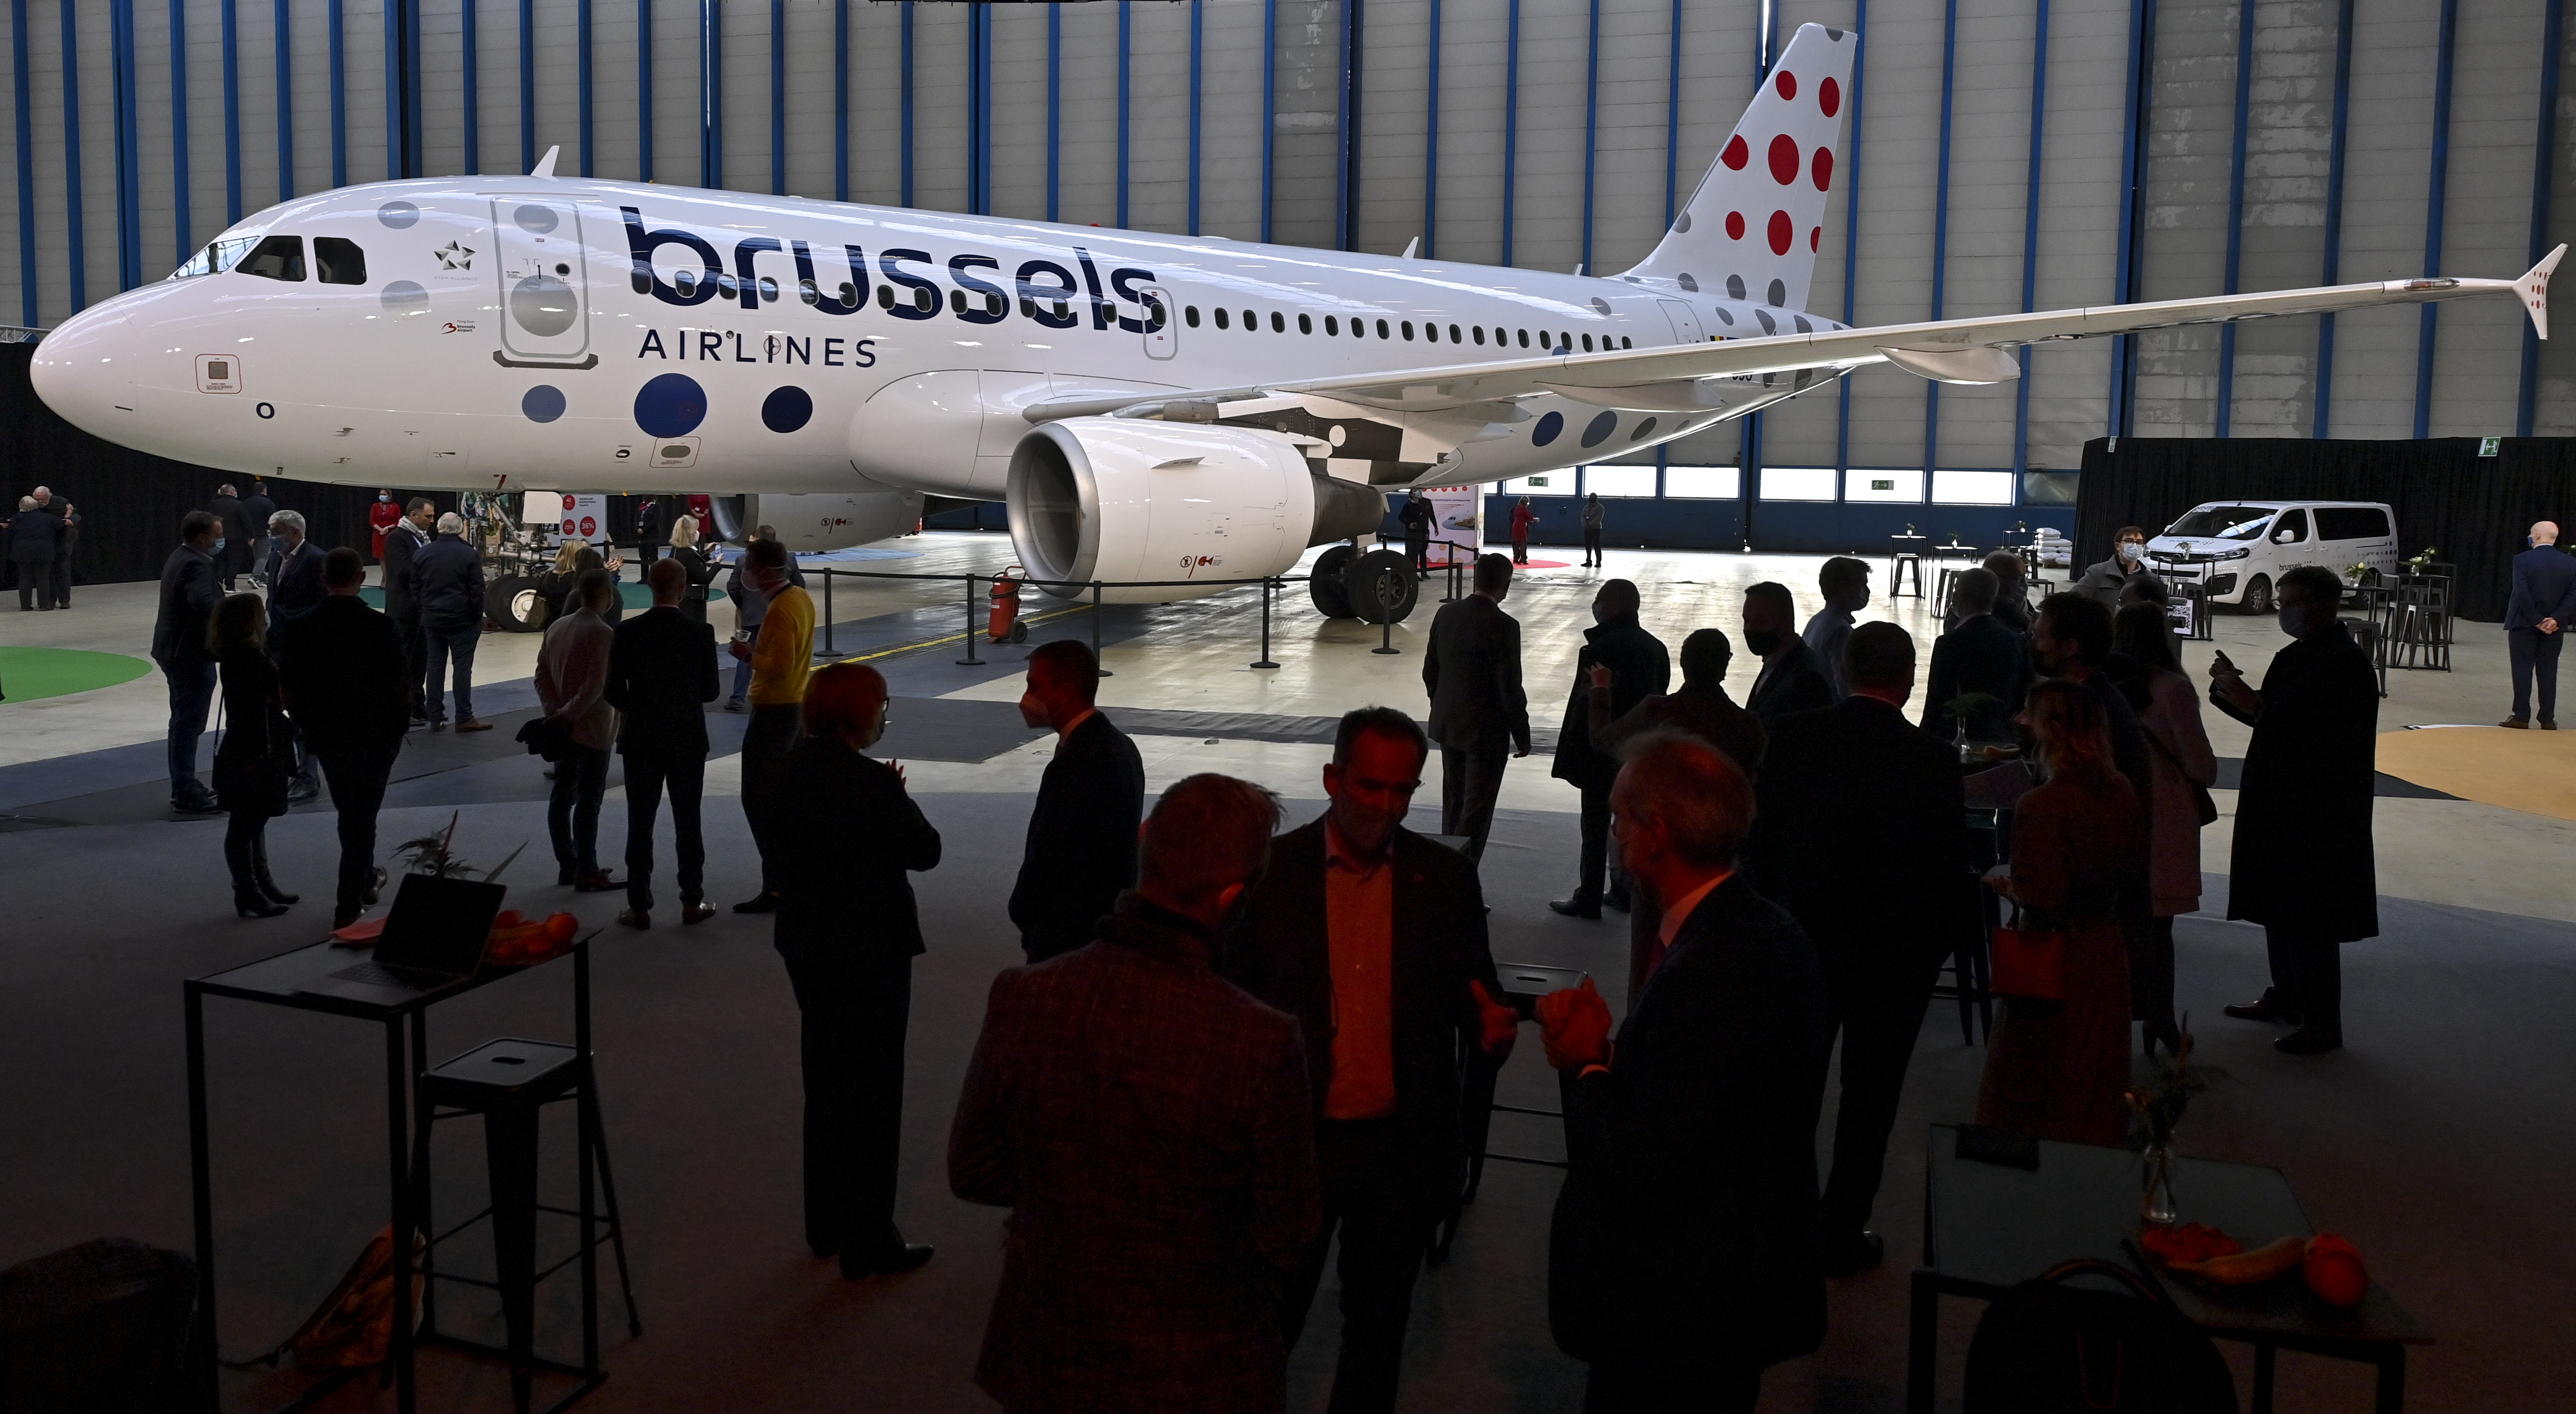 Brussels Airlines’ new logo causes some ‘turbulence’